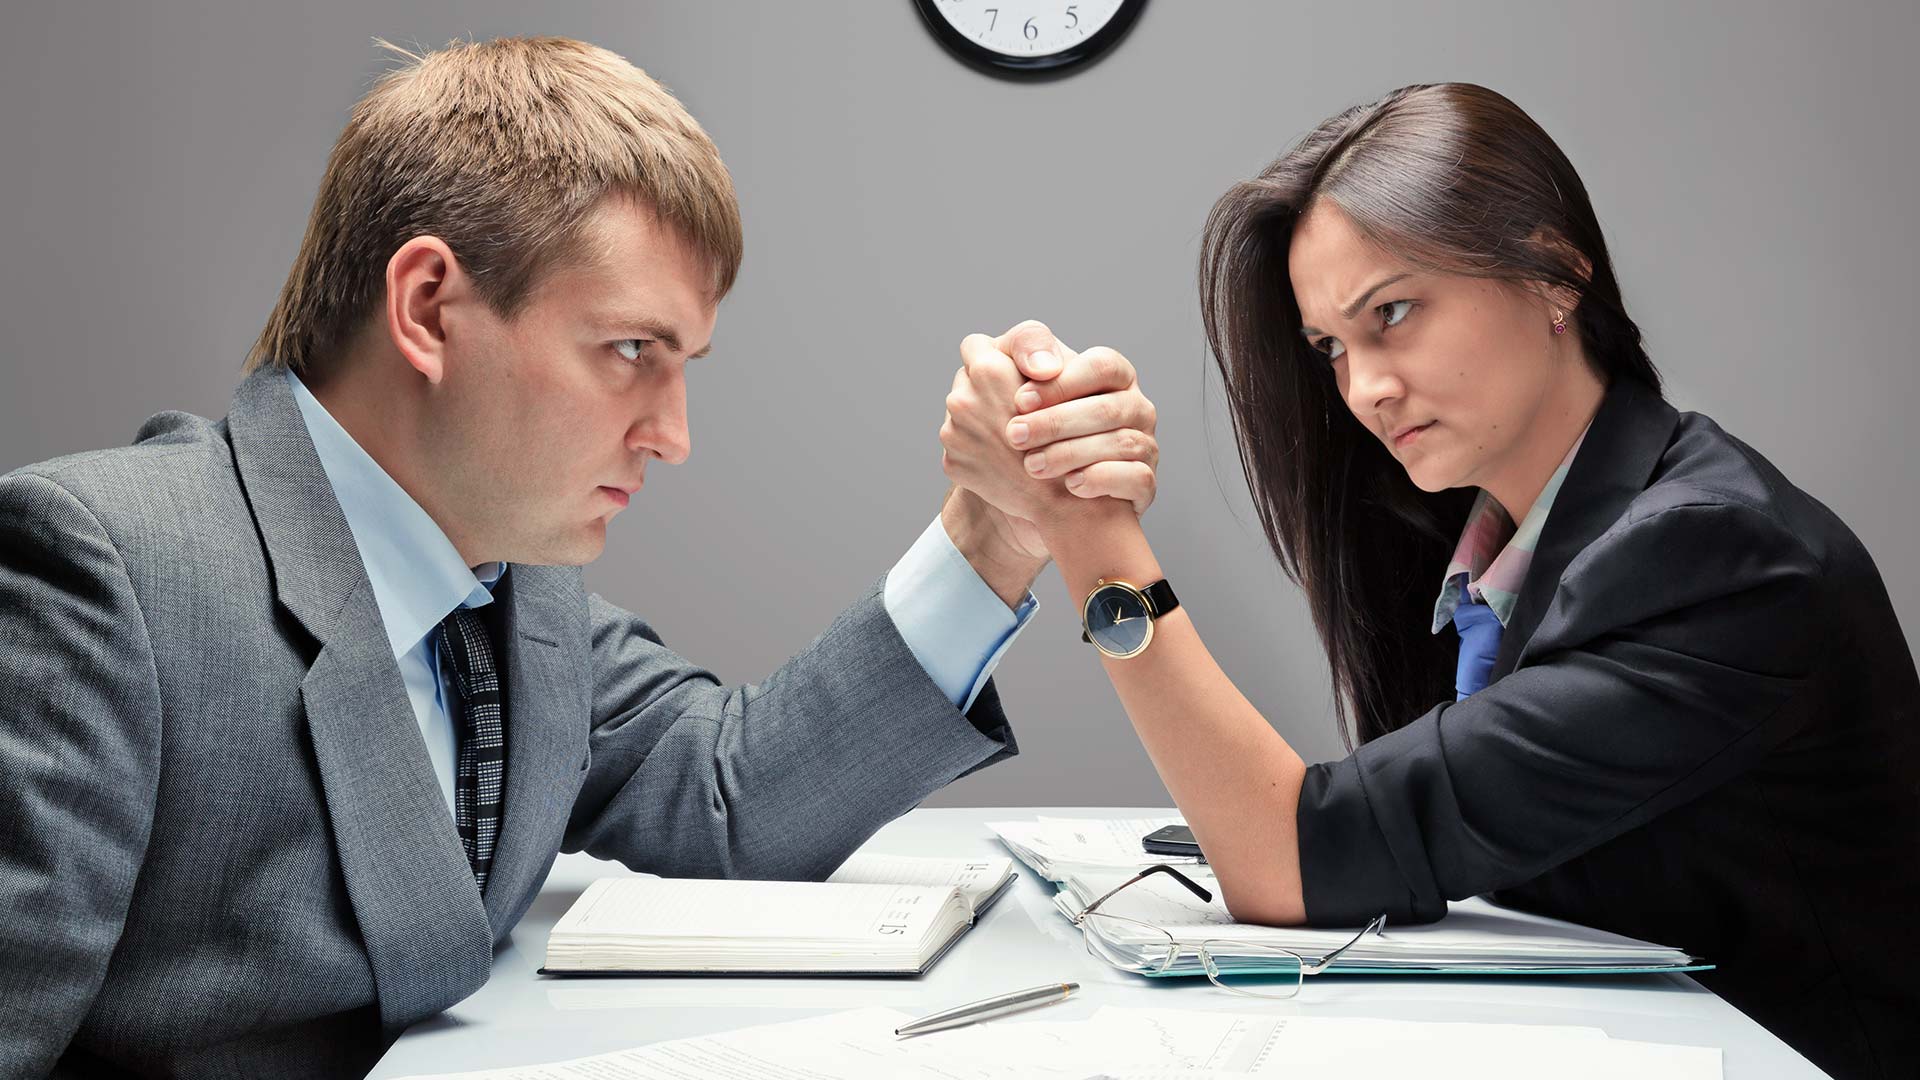 12 negotiation tips to help you come away happy